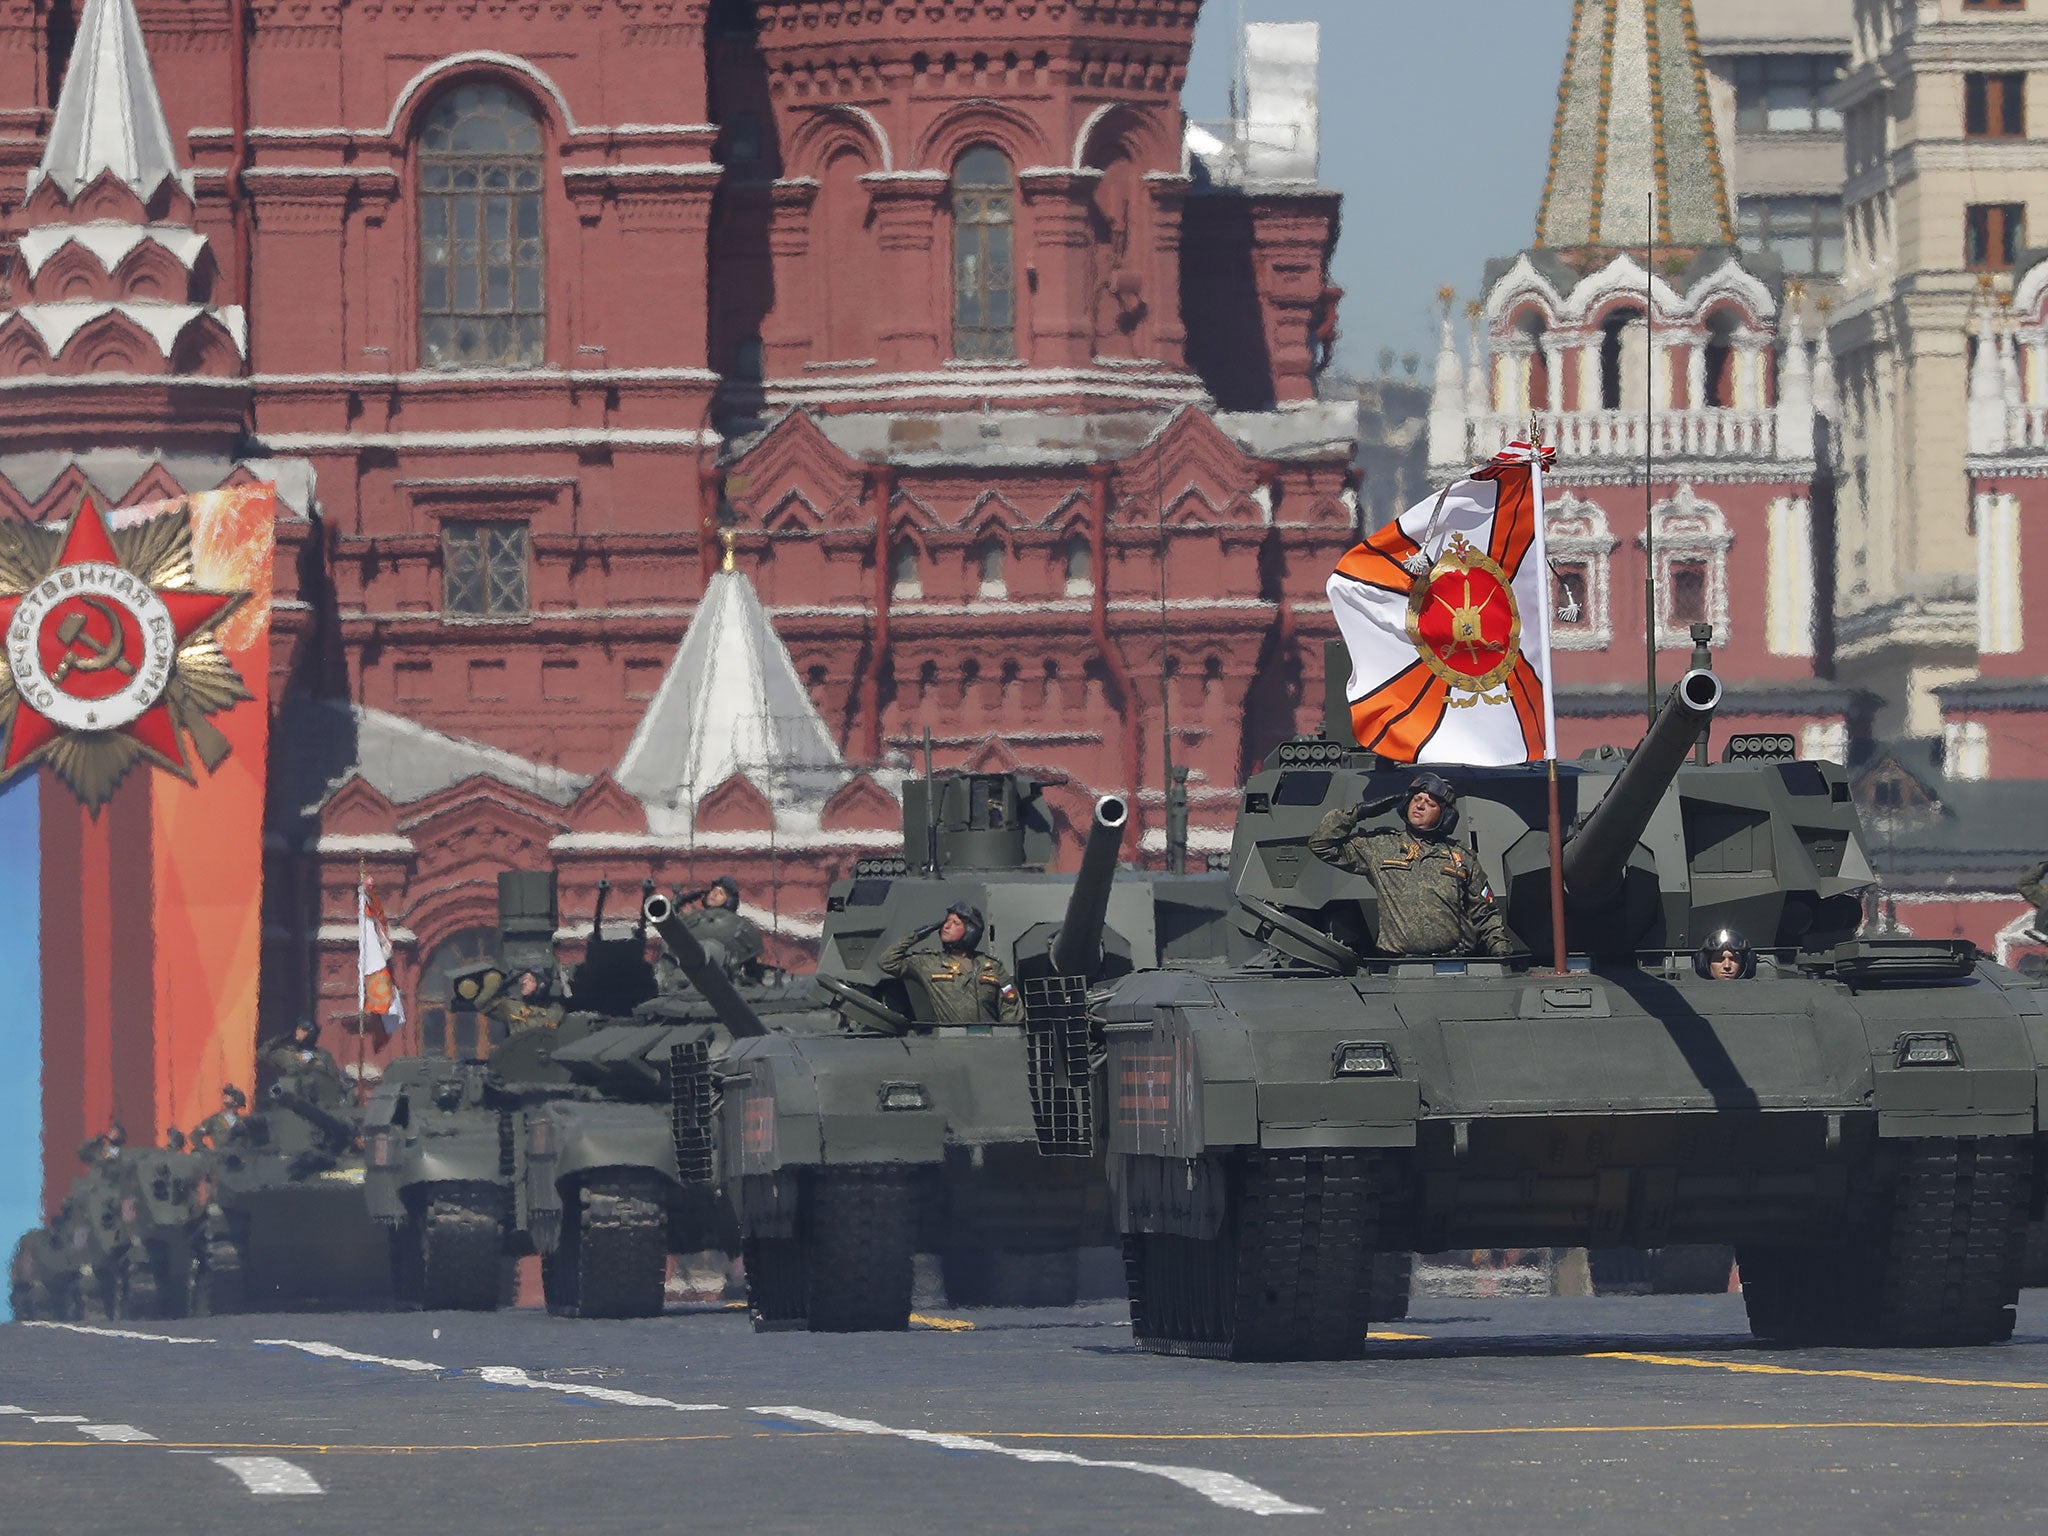 Armata tanks take part in the Victory Day military parade in Red Square in Moscow